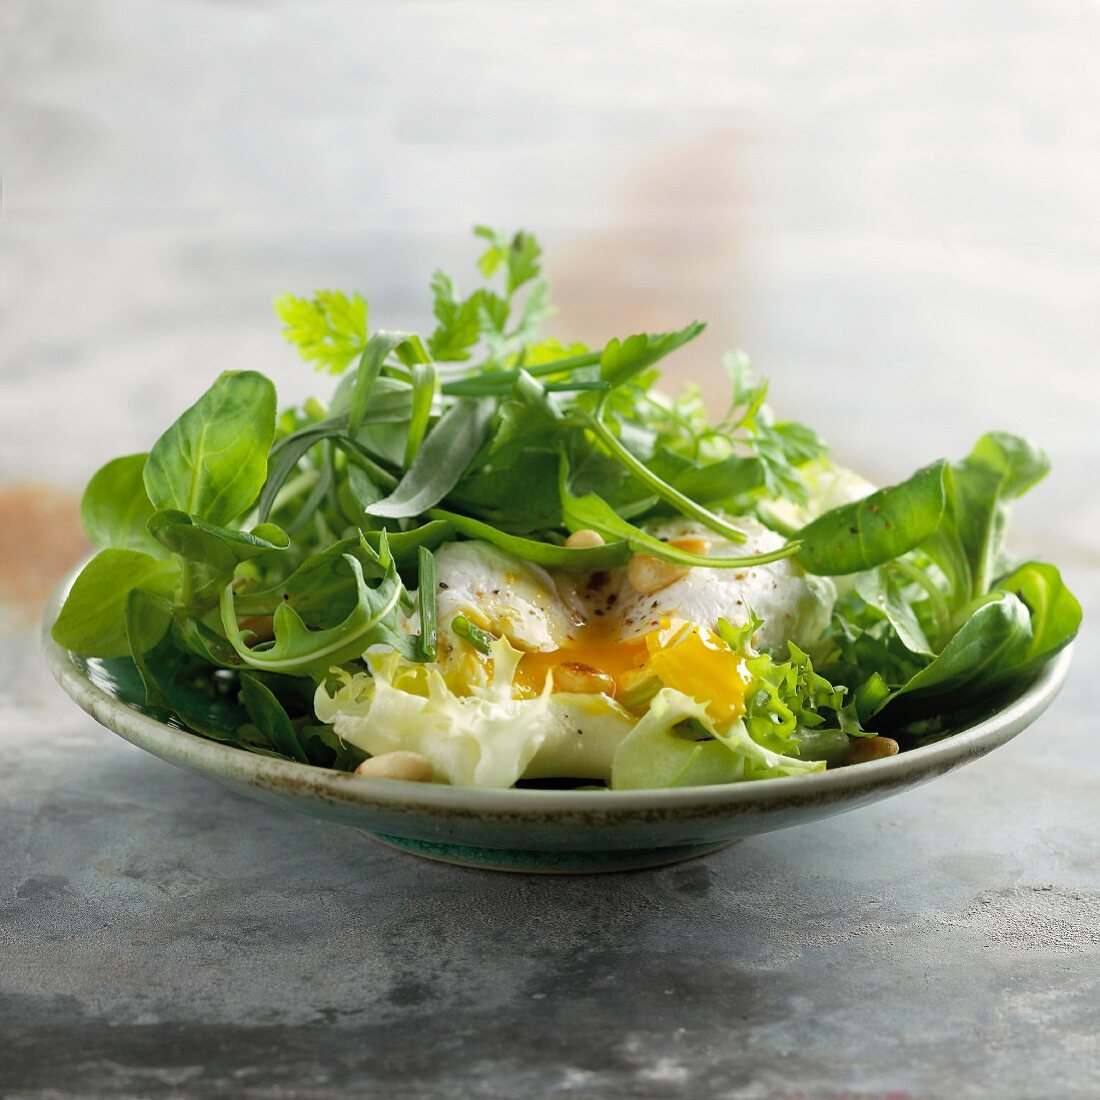 Herb and runny egg salad